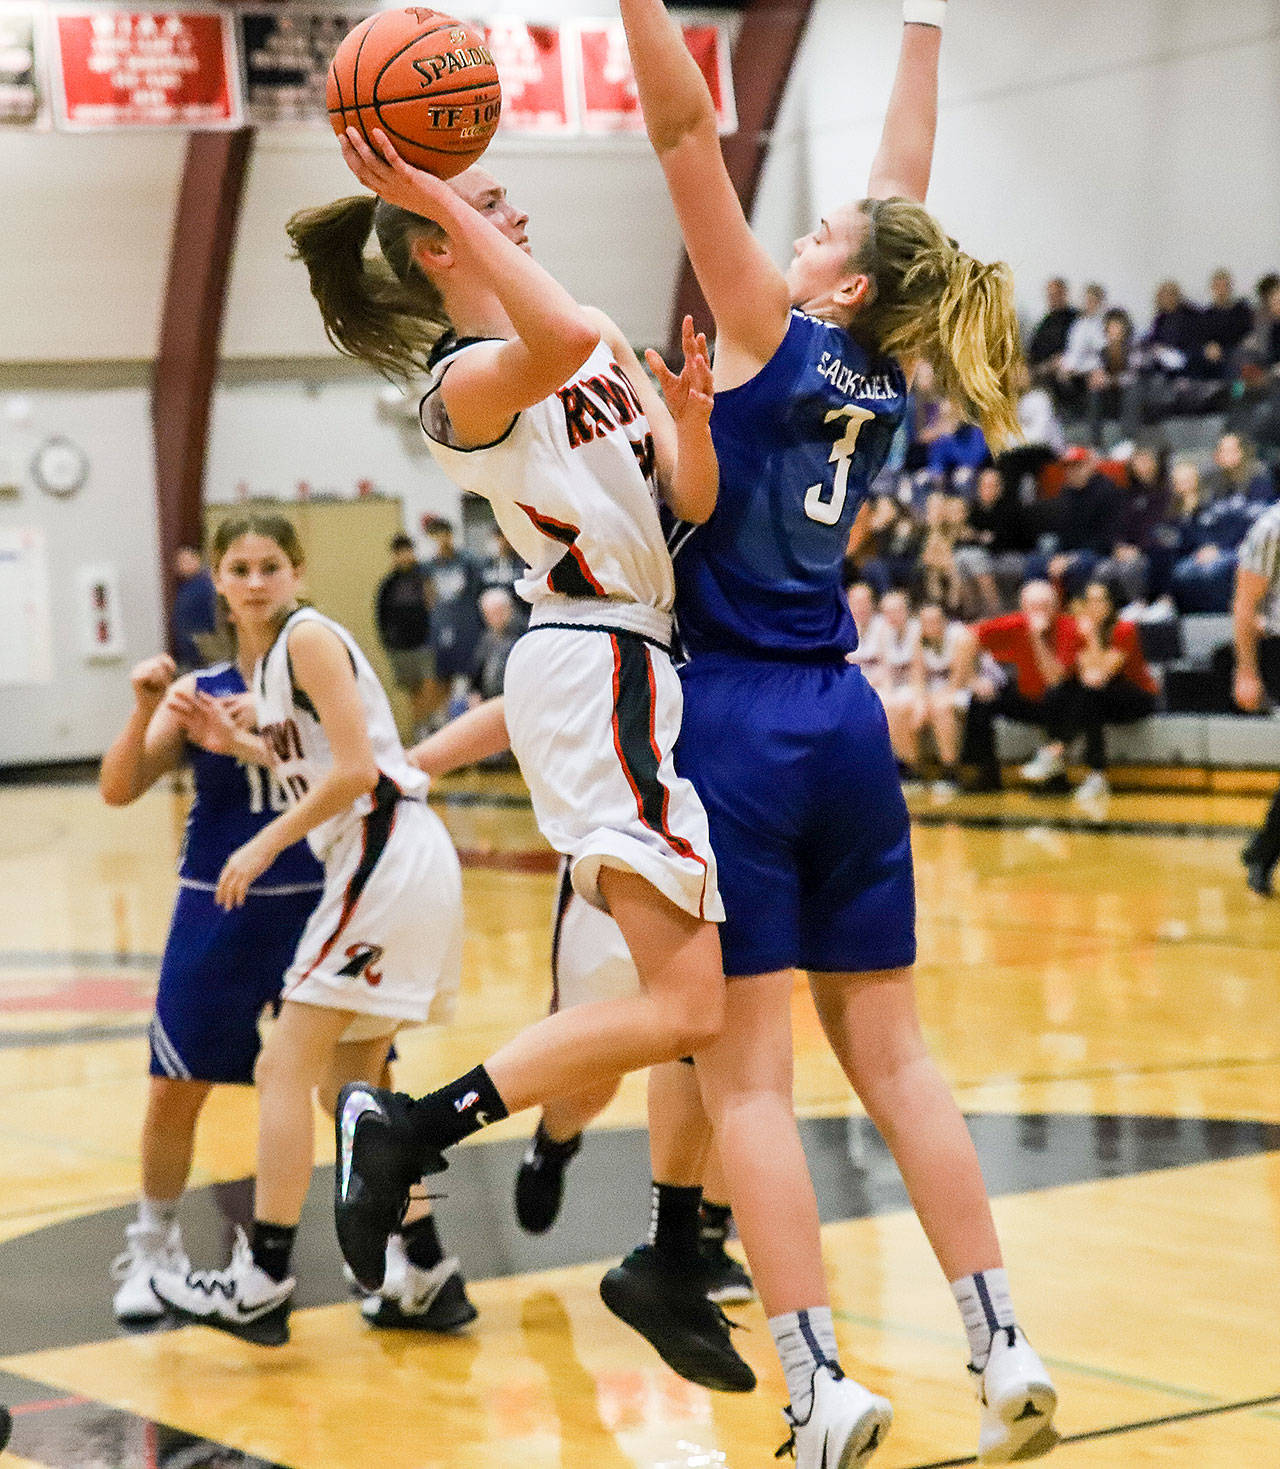 Raymond’s Kyra Gardner, left, goes up for a shot while being defended by Elma’s Jalyn Sackrider during Raymond’s 49-47 victory on Tuesday at Raymond High School. Gardner led all scorers with 30 points. (Photo by Larry Bale)